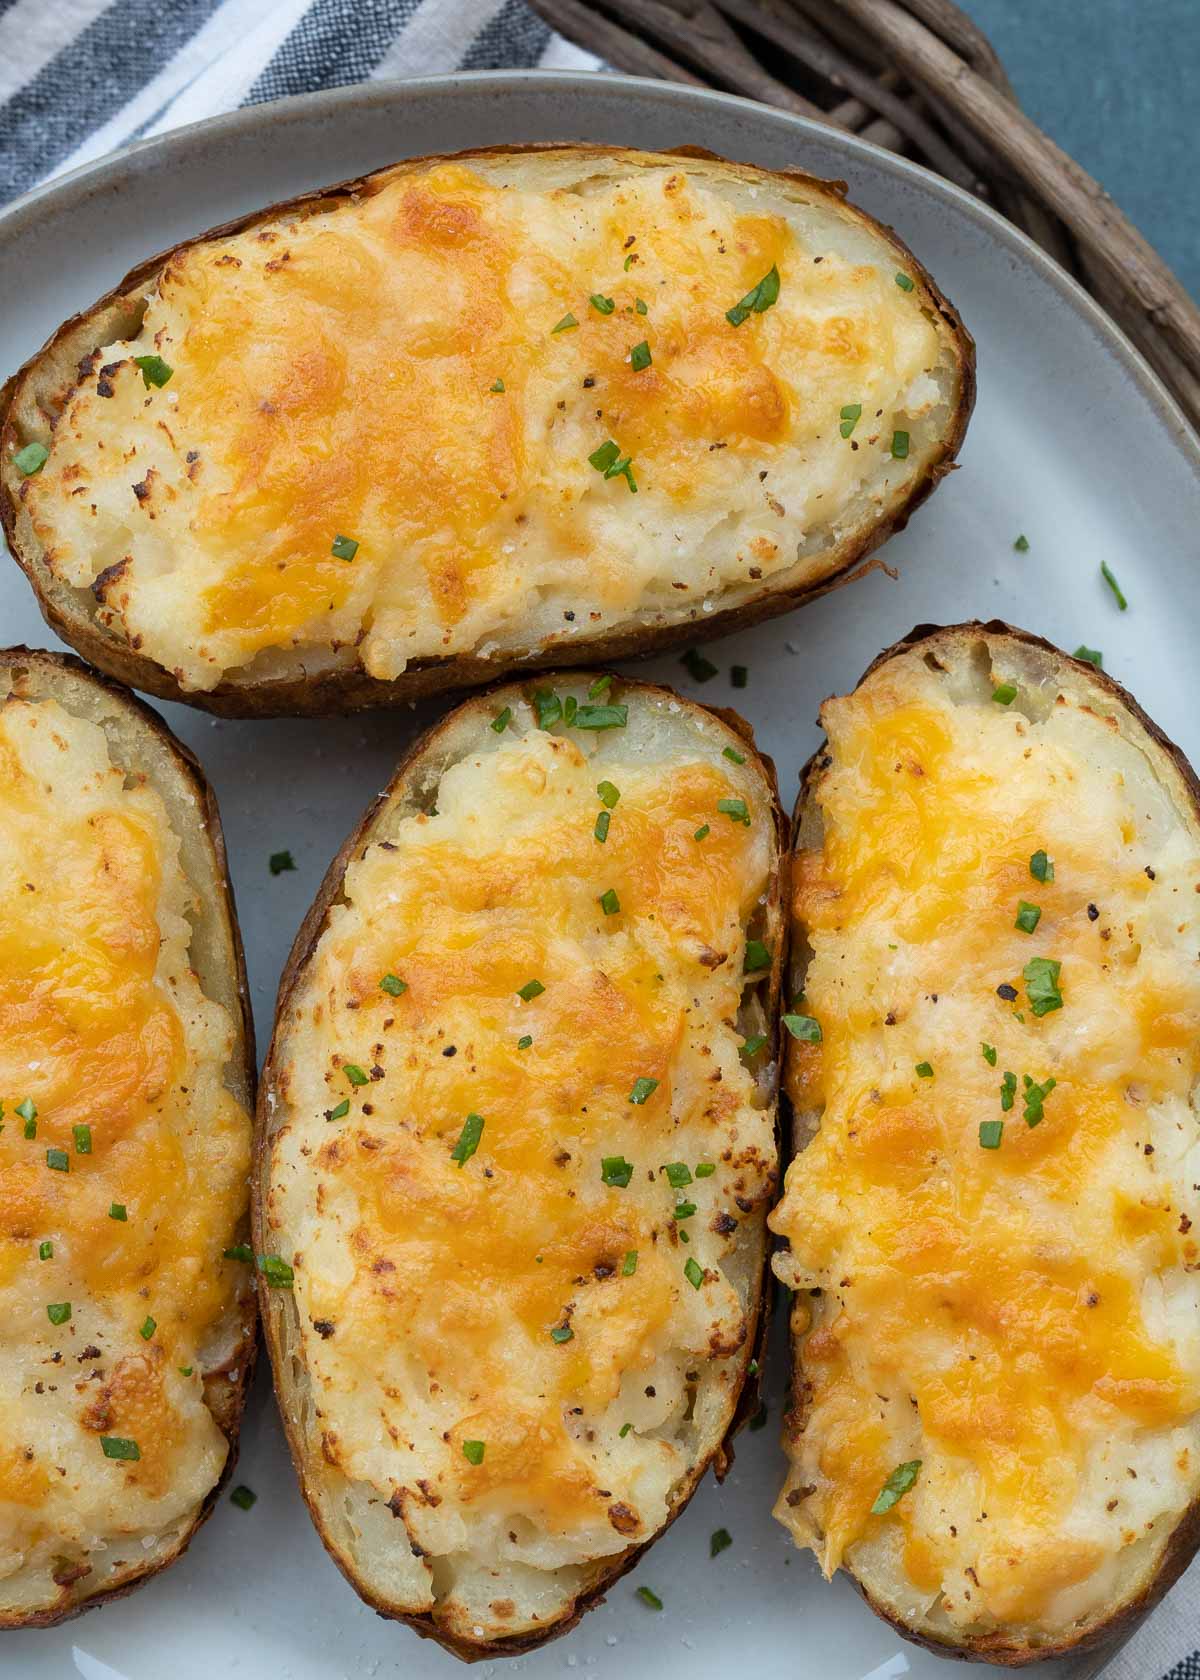 These Air Fryer Twice Baked Potatoes are the perfect side dish or appetizer! Get that cheesy center and ultra-crispy potato skin quickly with this easy recipe.